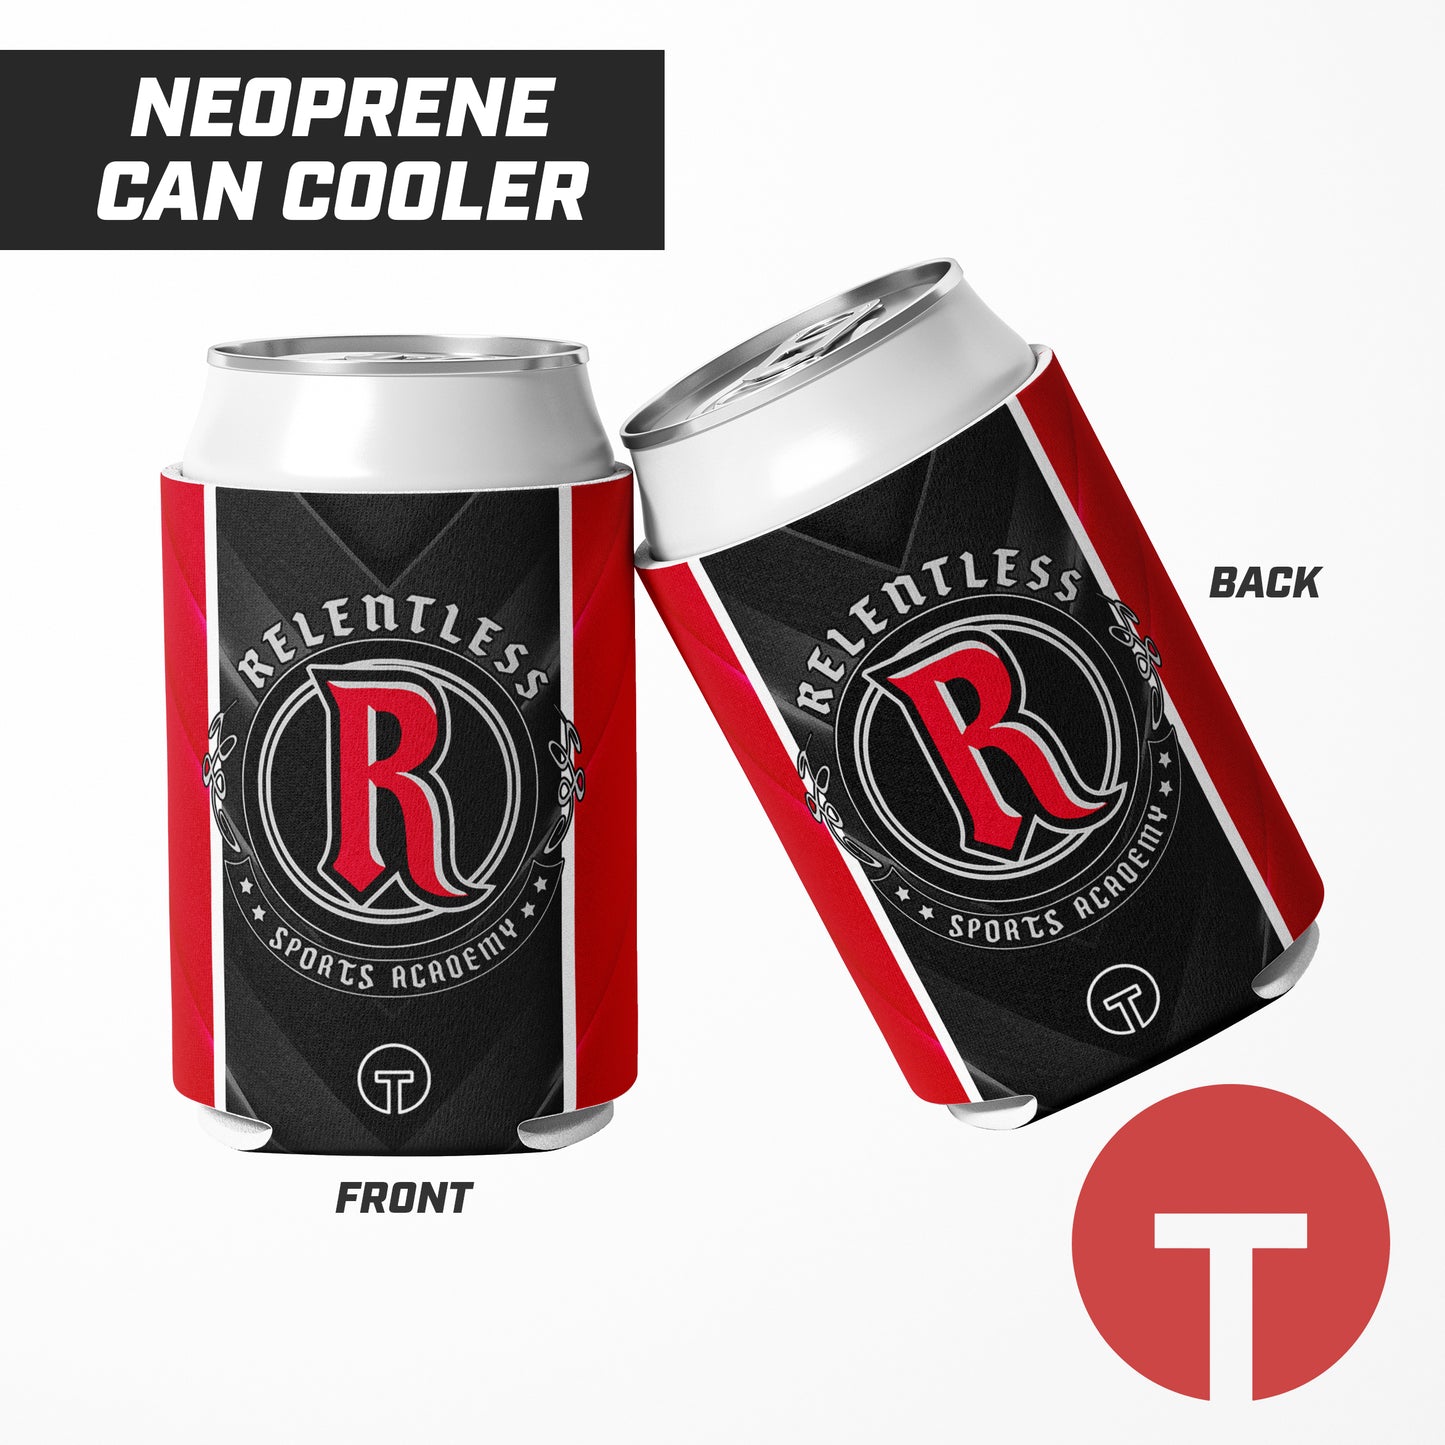 Relentless Force - LOGO 1 - Coozie